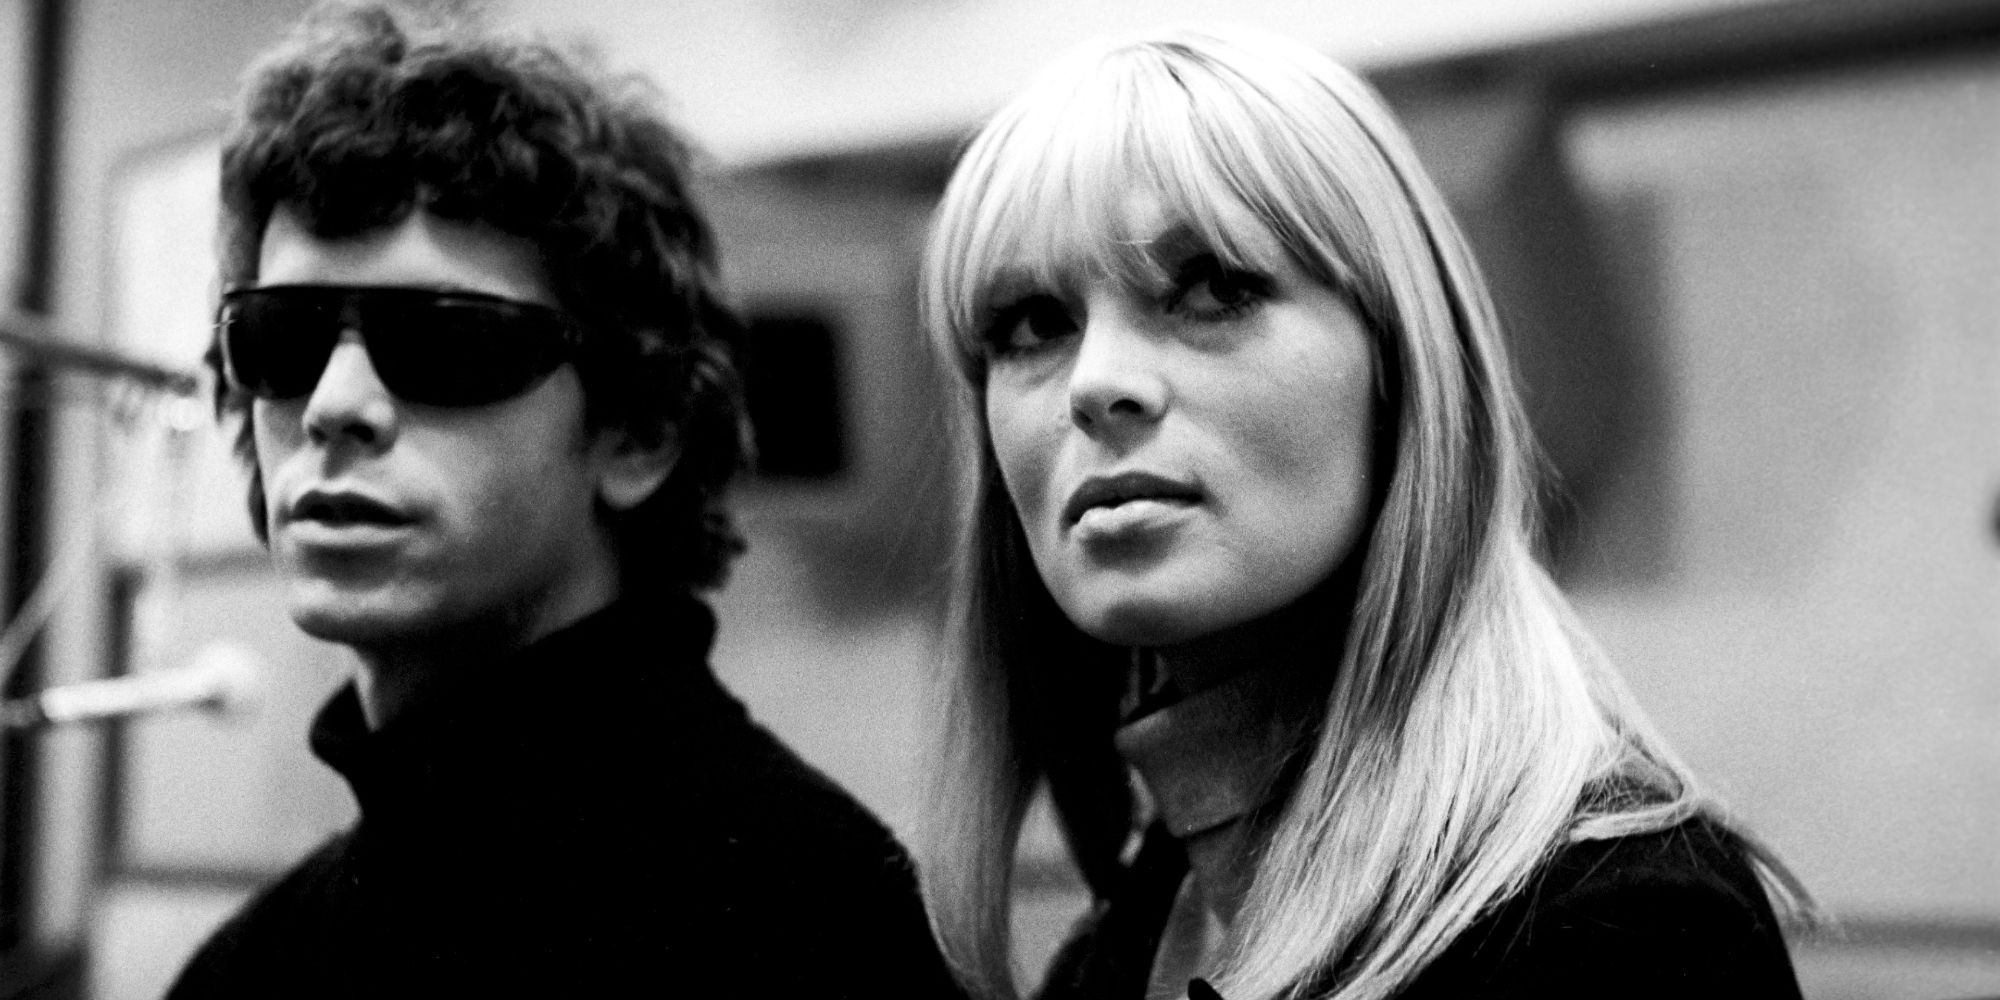 Lou Reed and Nico of the Velvet Underground look artistically glum together in 1967.